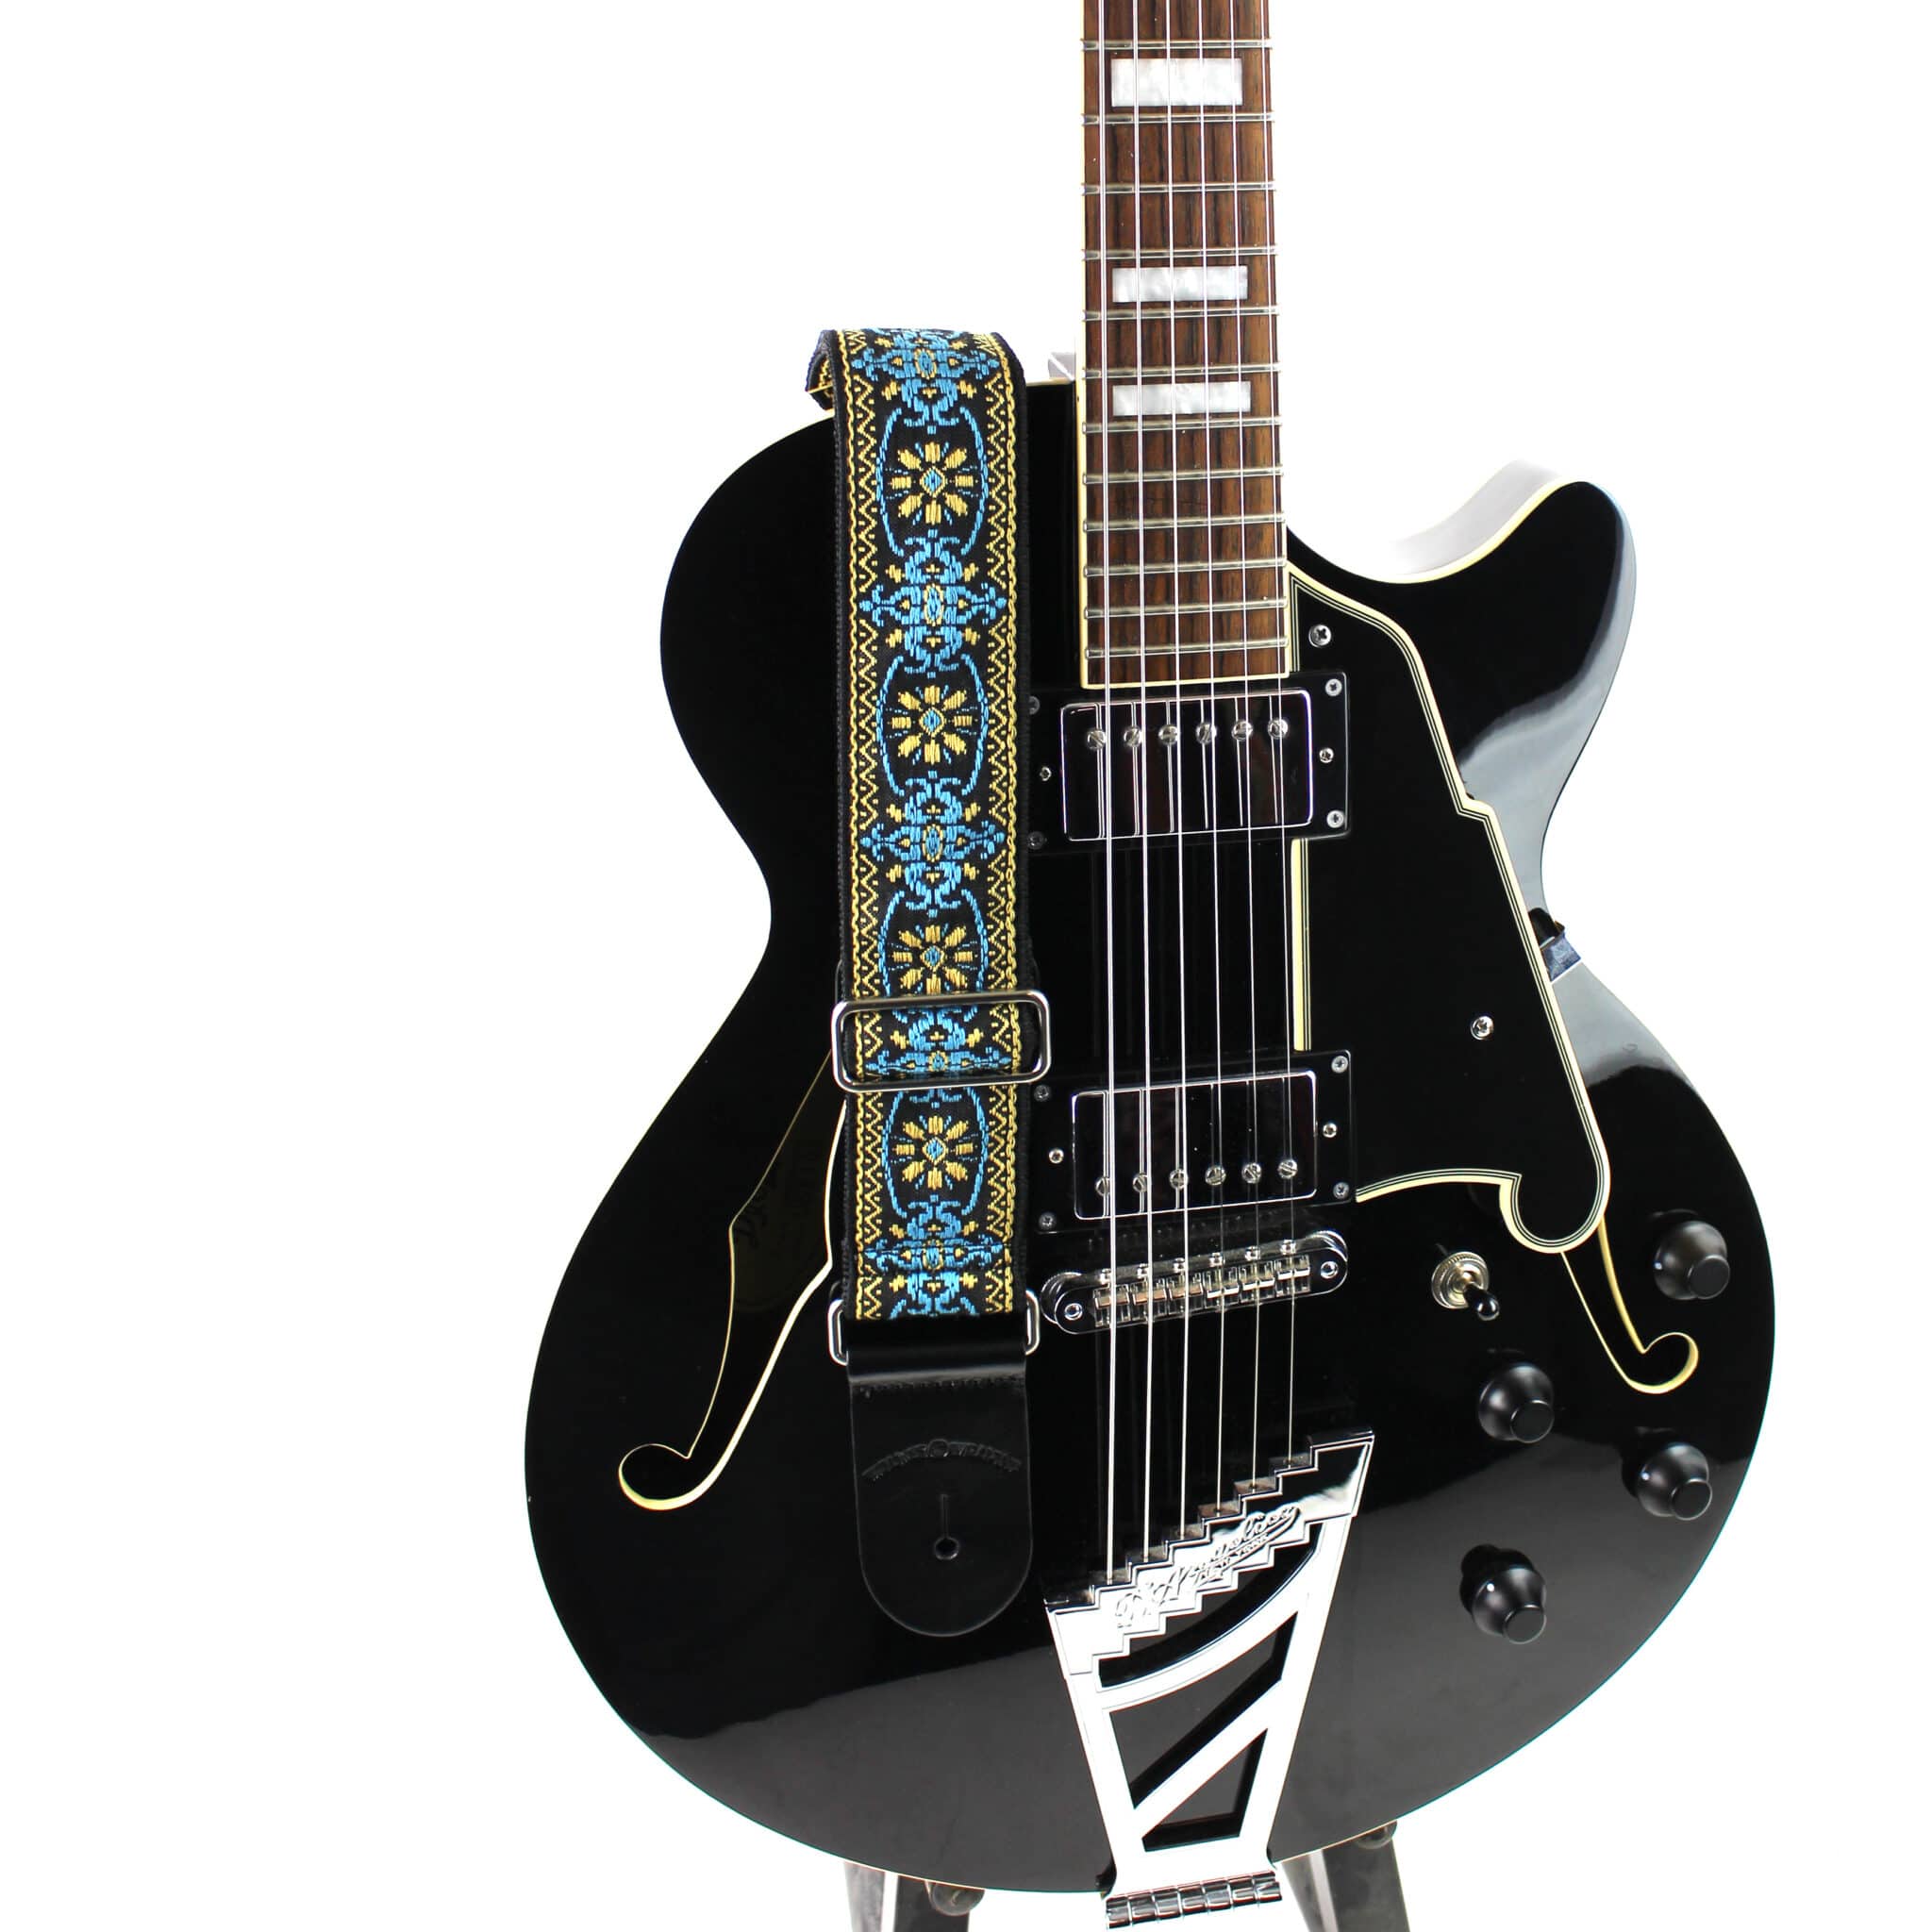 H-01-MET Vintage Series Blue & Gold Mandala Woven Guitar Strap with Chrome  Hardware & Leather Ends